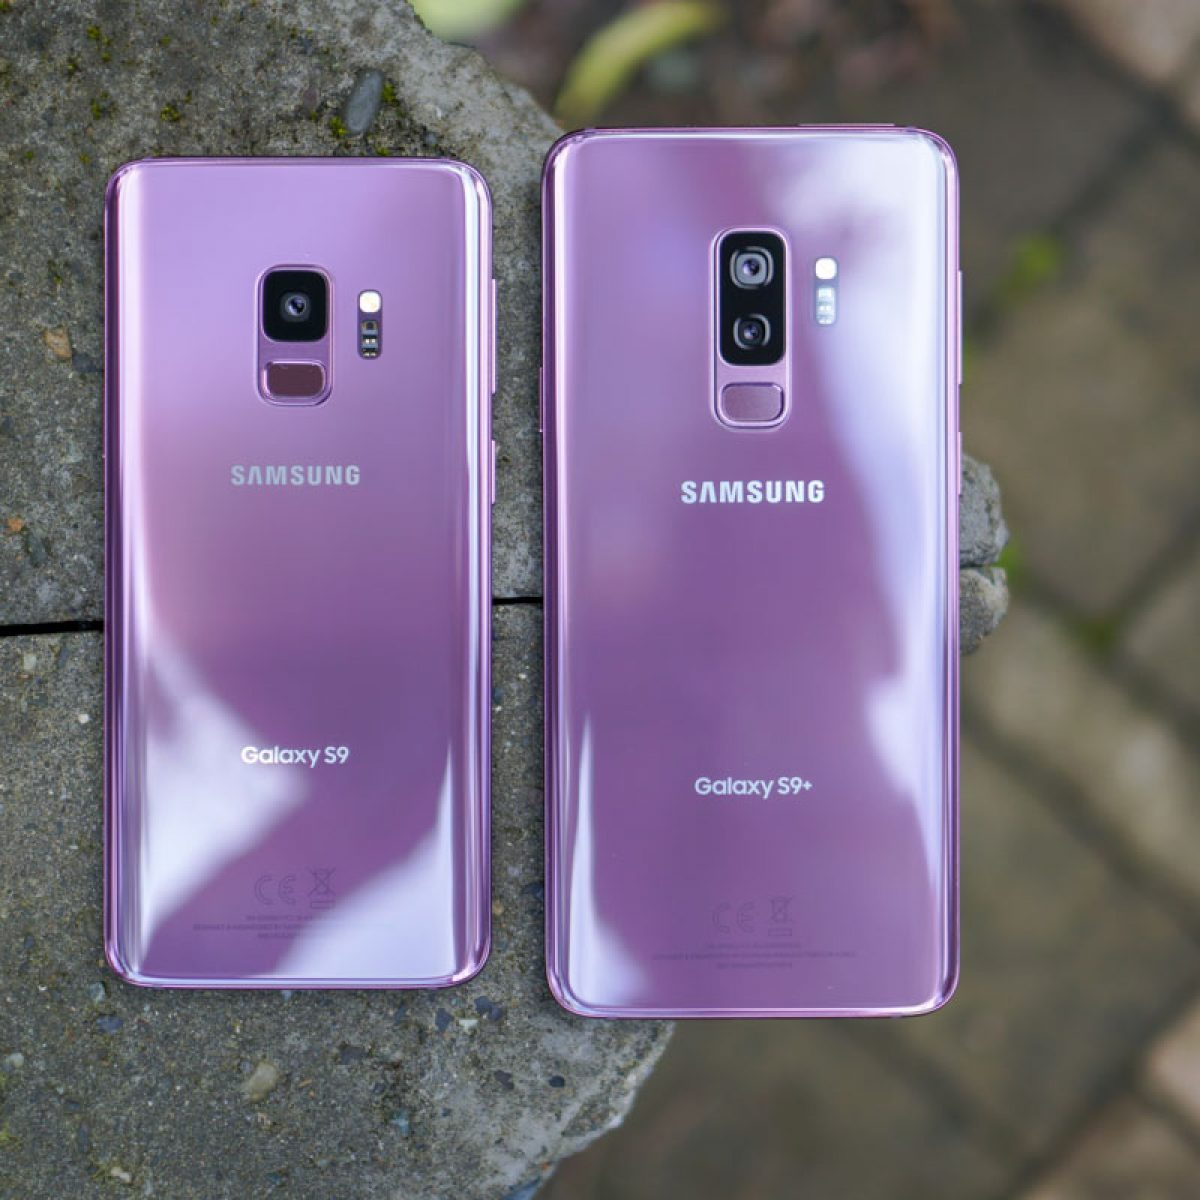 Galaxy S9 vs. Galaxy S9 Plus: What's the difference? - CNET